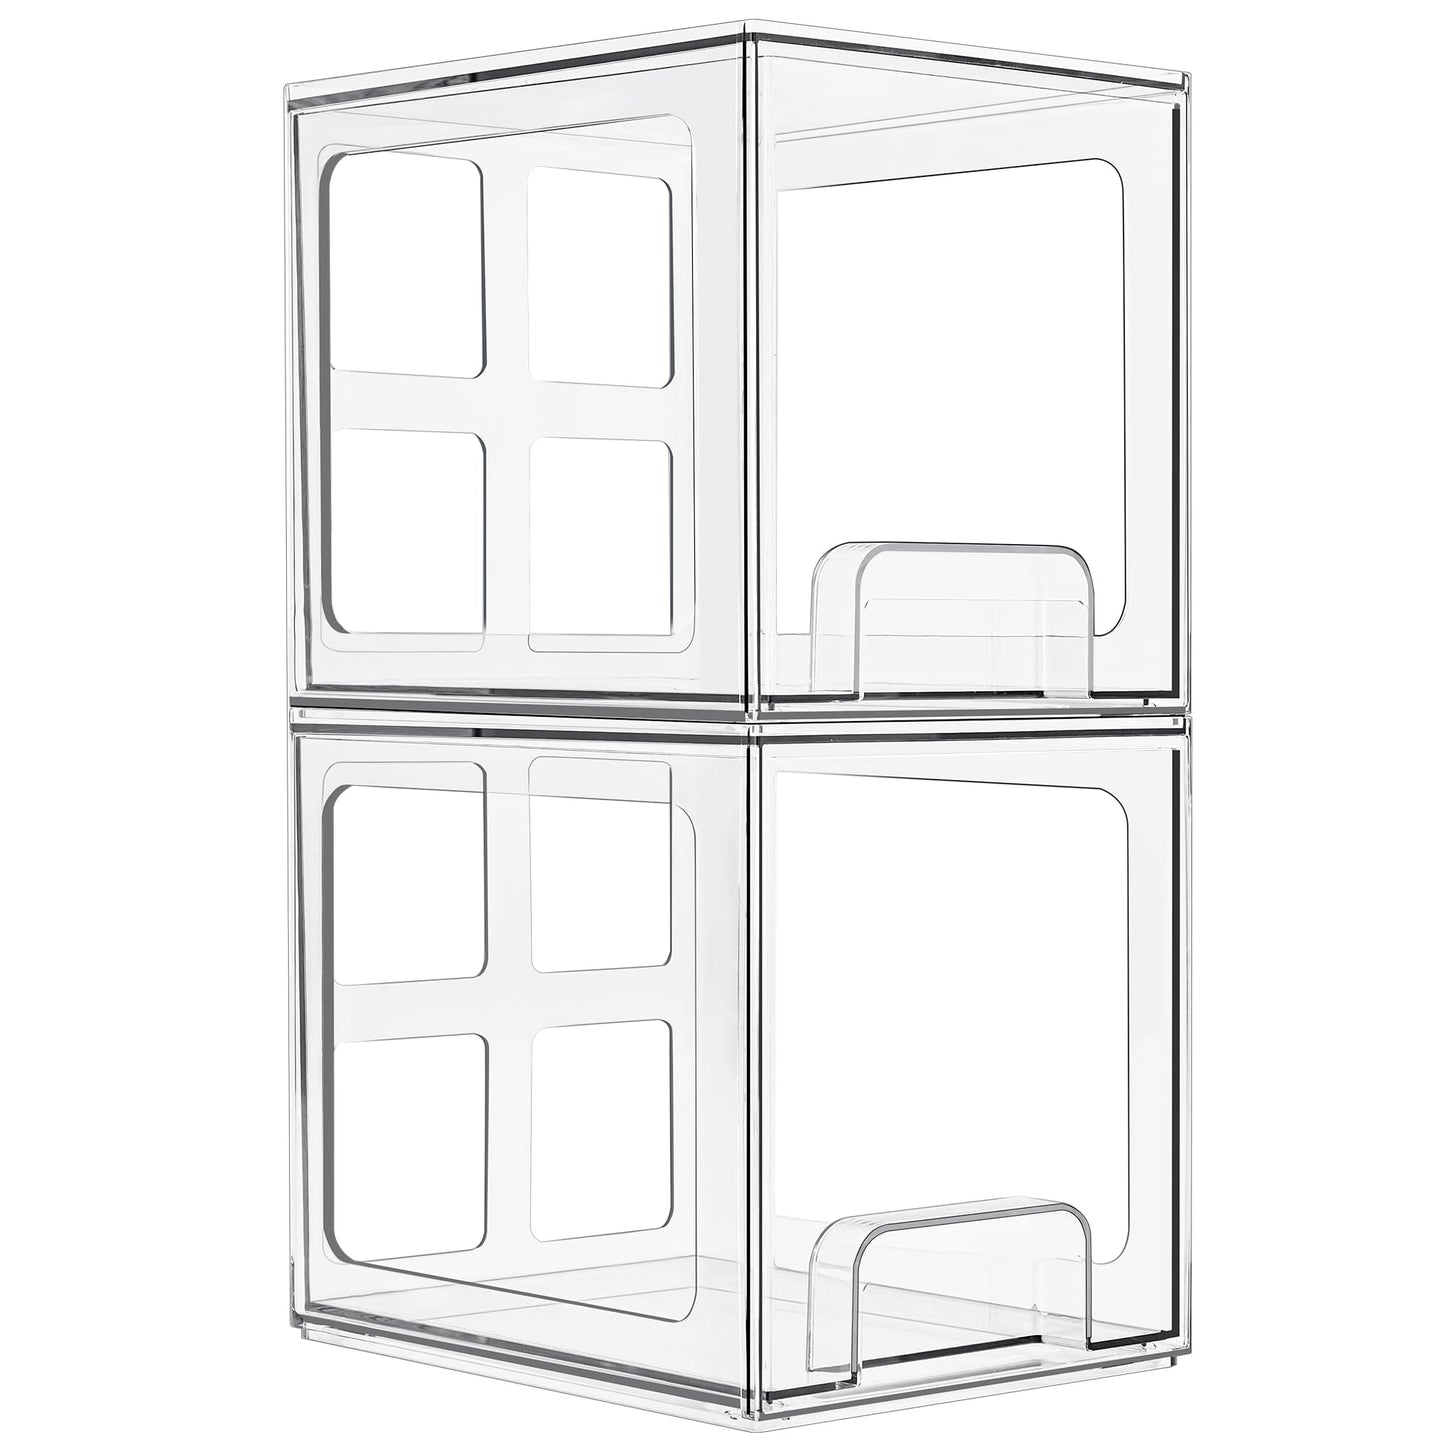 SMARTAKE 2 Pack Stackable Makeup Organizer Drawers, Acrylic Bathroom Organizers, 6.6'' Tall Clear Plastic Storage Drawers for Vanity, Undersink, Kitchen Cabinets, Skincare, Pantry Organization